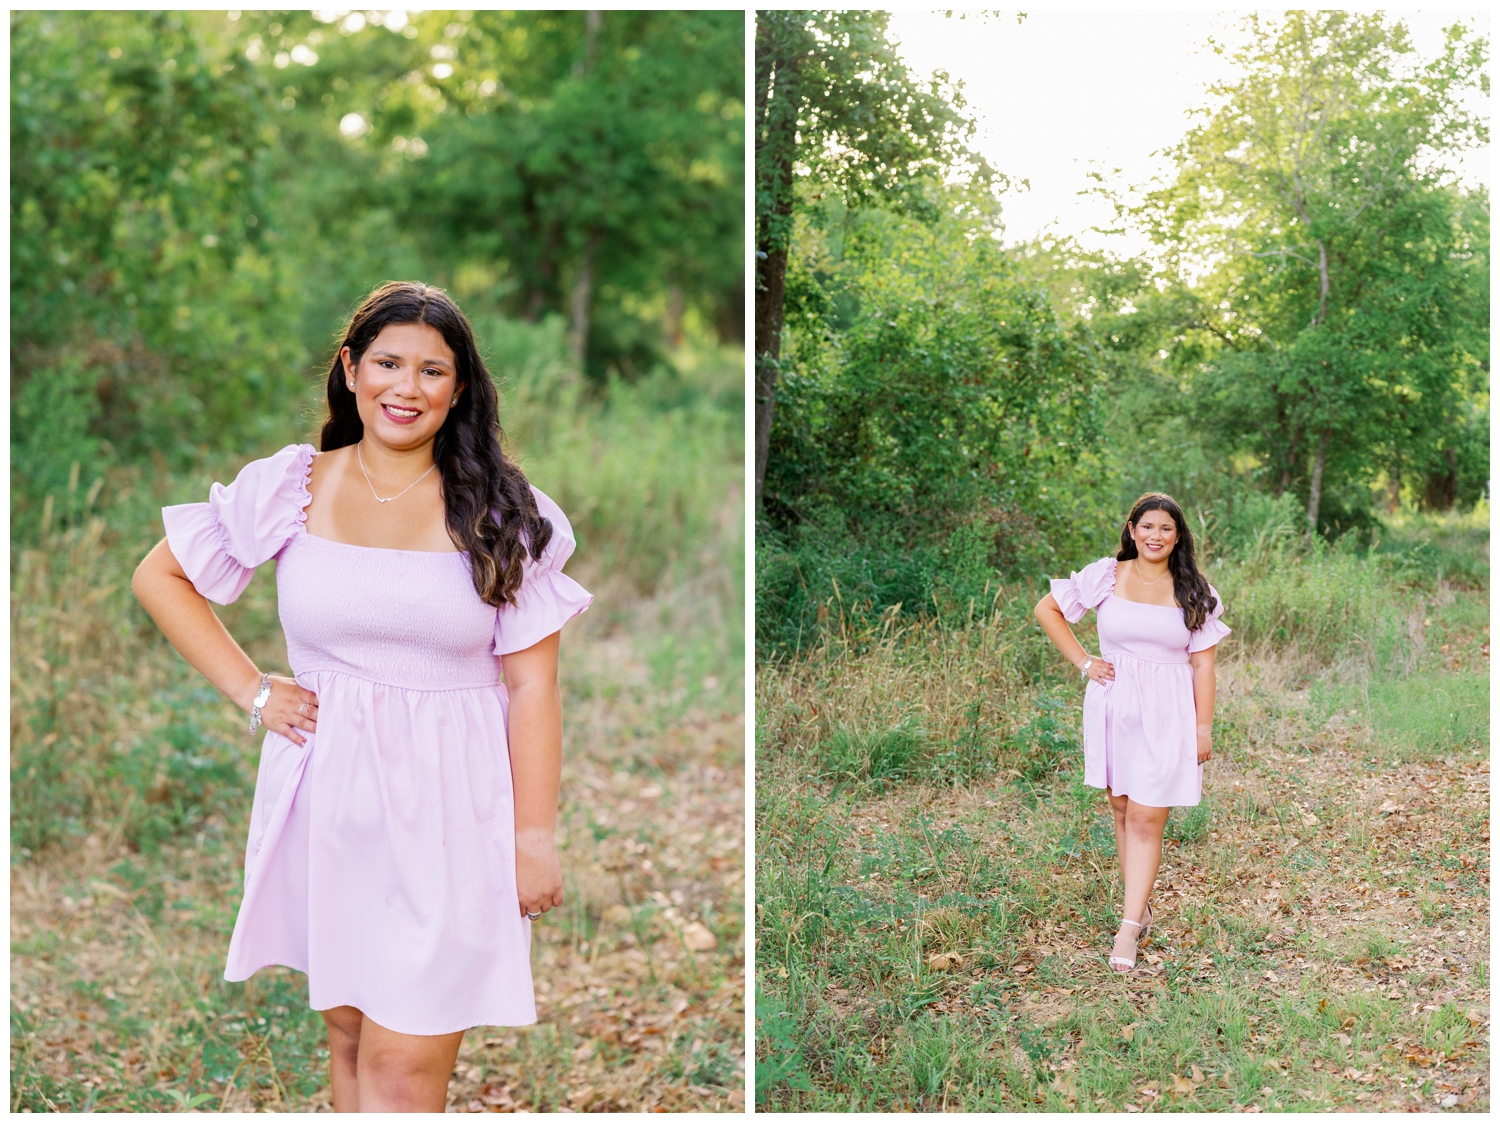 Dawson high school senior girl in pink dress with hand on hip in a field